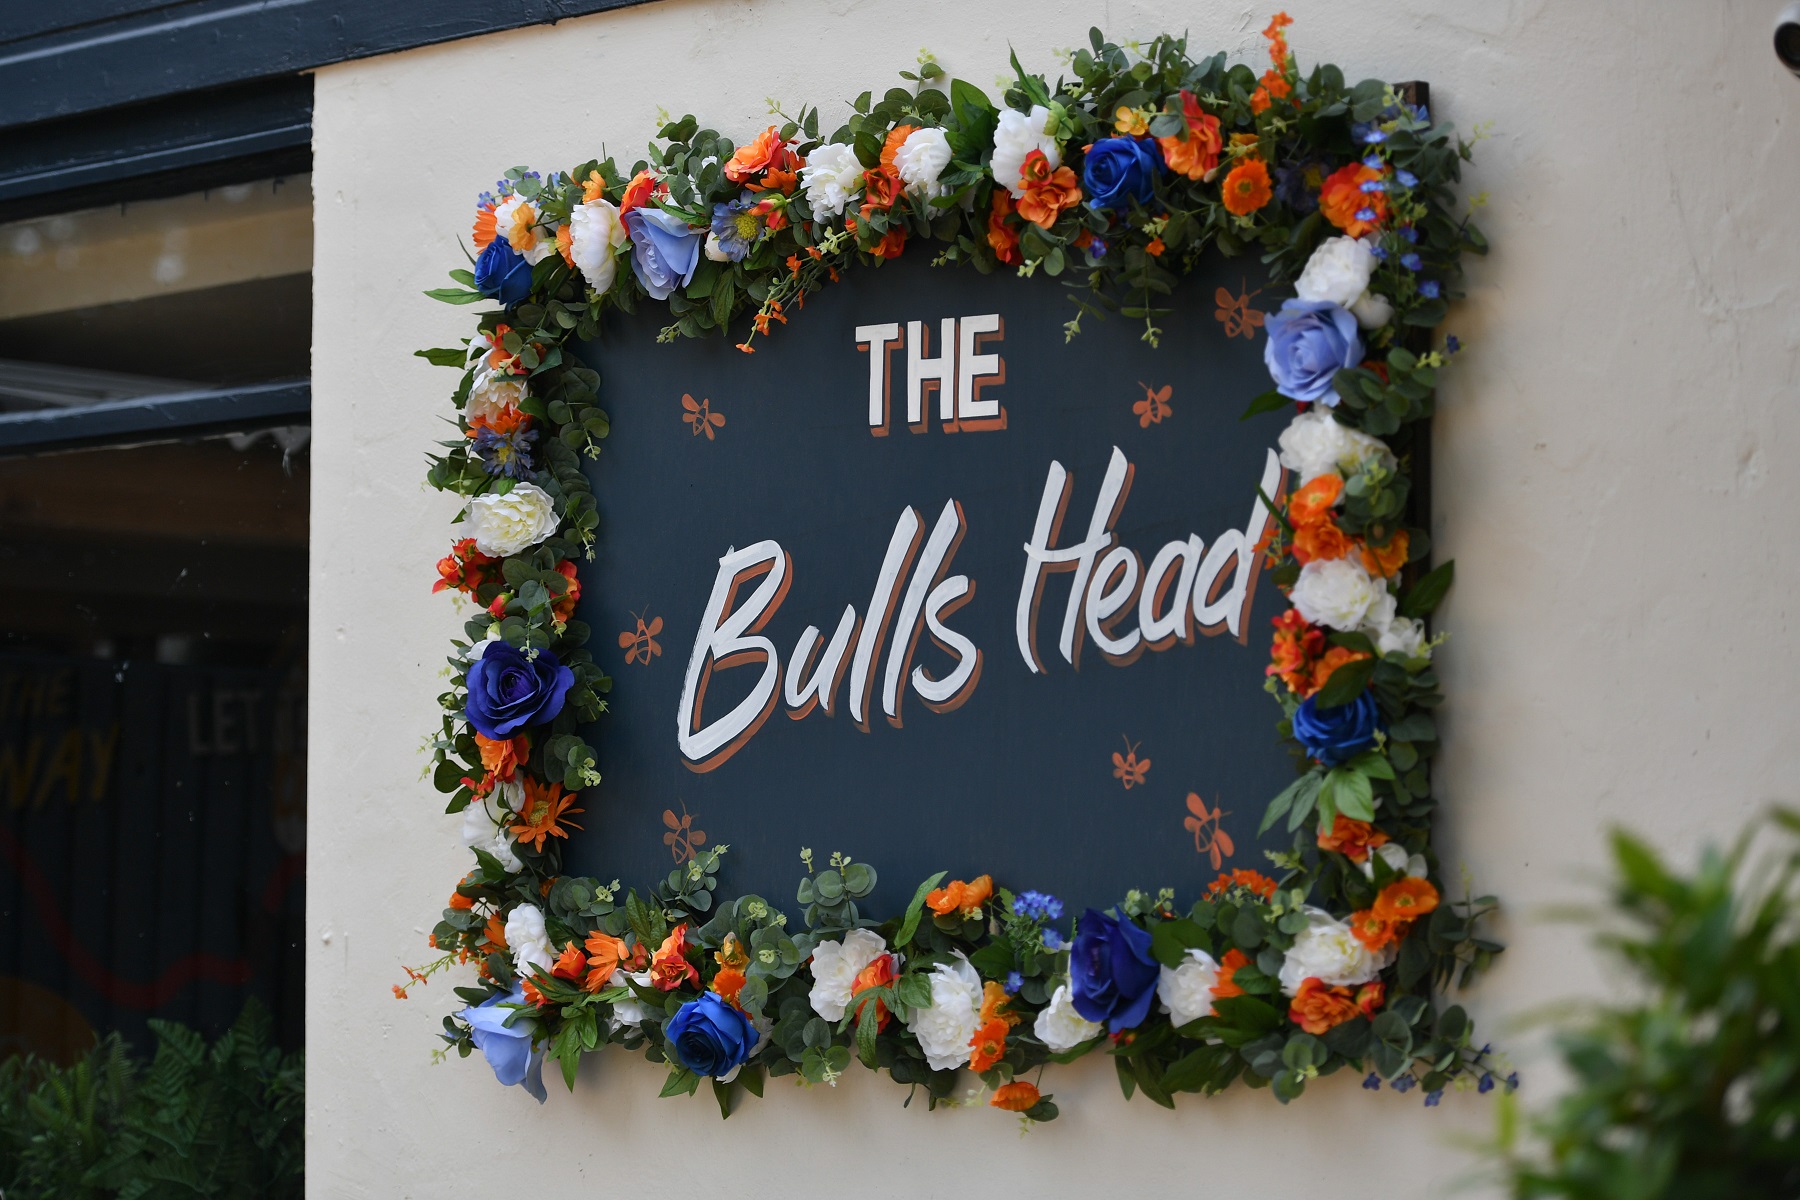 Bullock Smithy pub reopens as The Bulls Head after £450k transformation